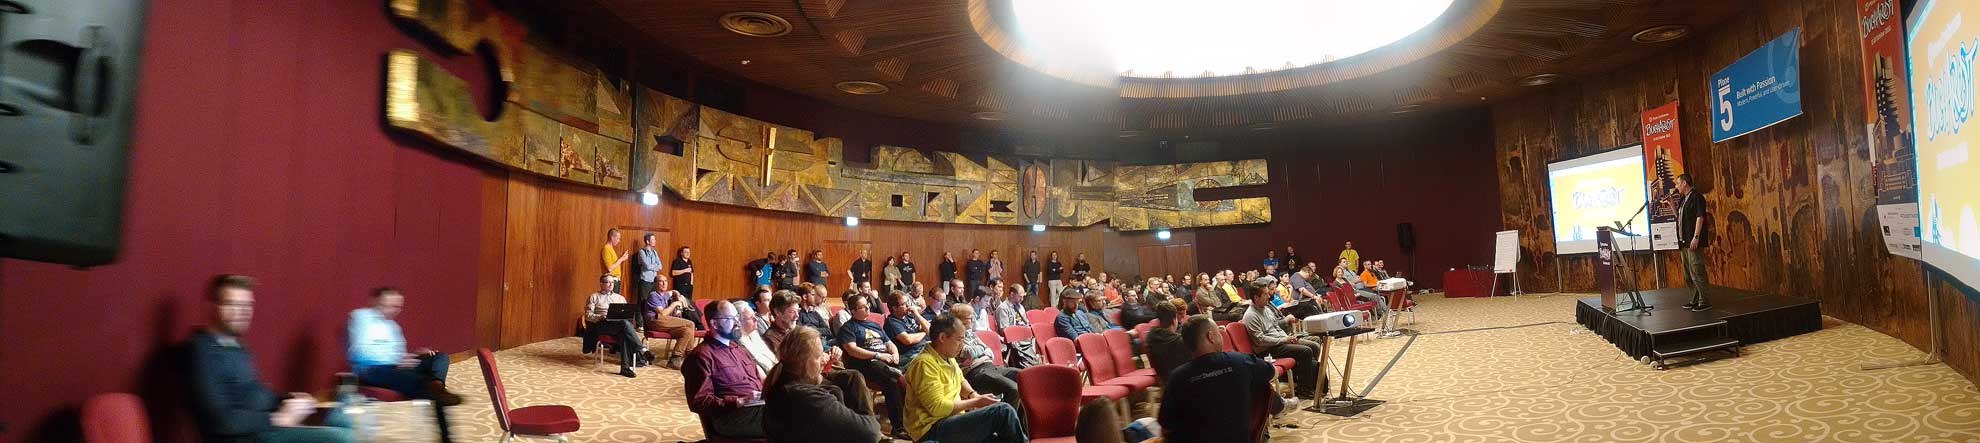 Plone Conference 2015 Bucharest – Great Hall